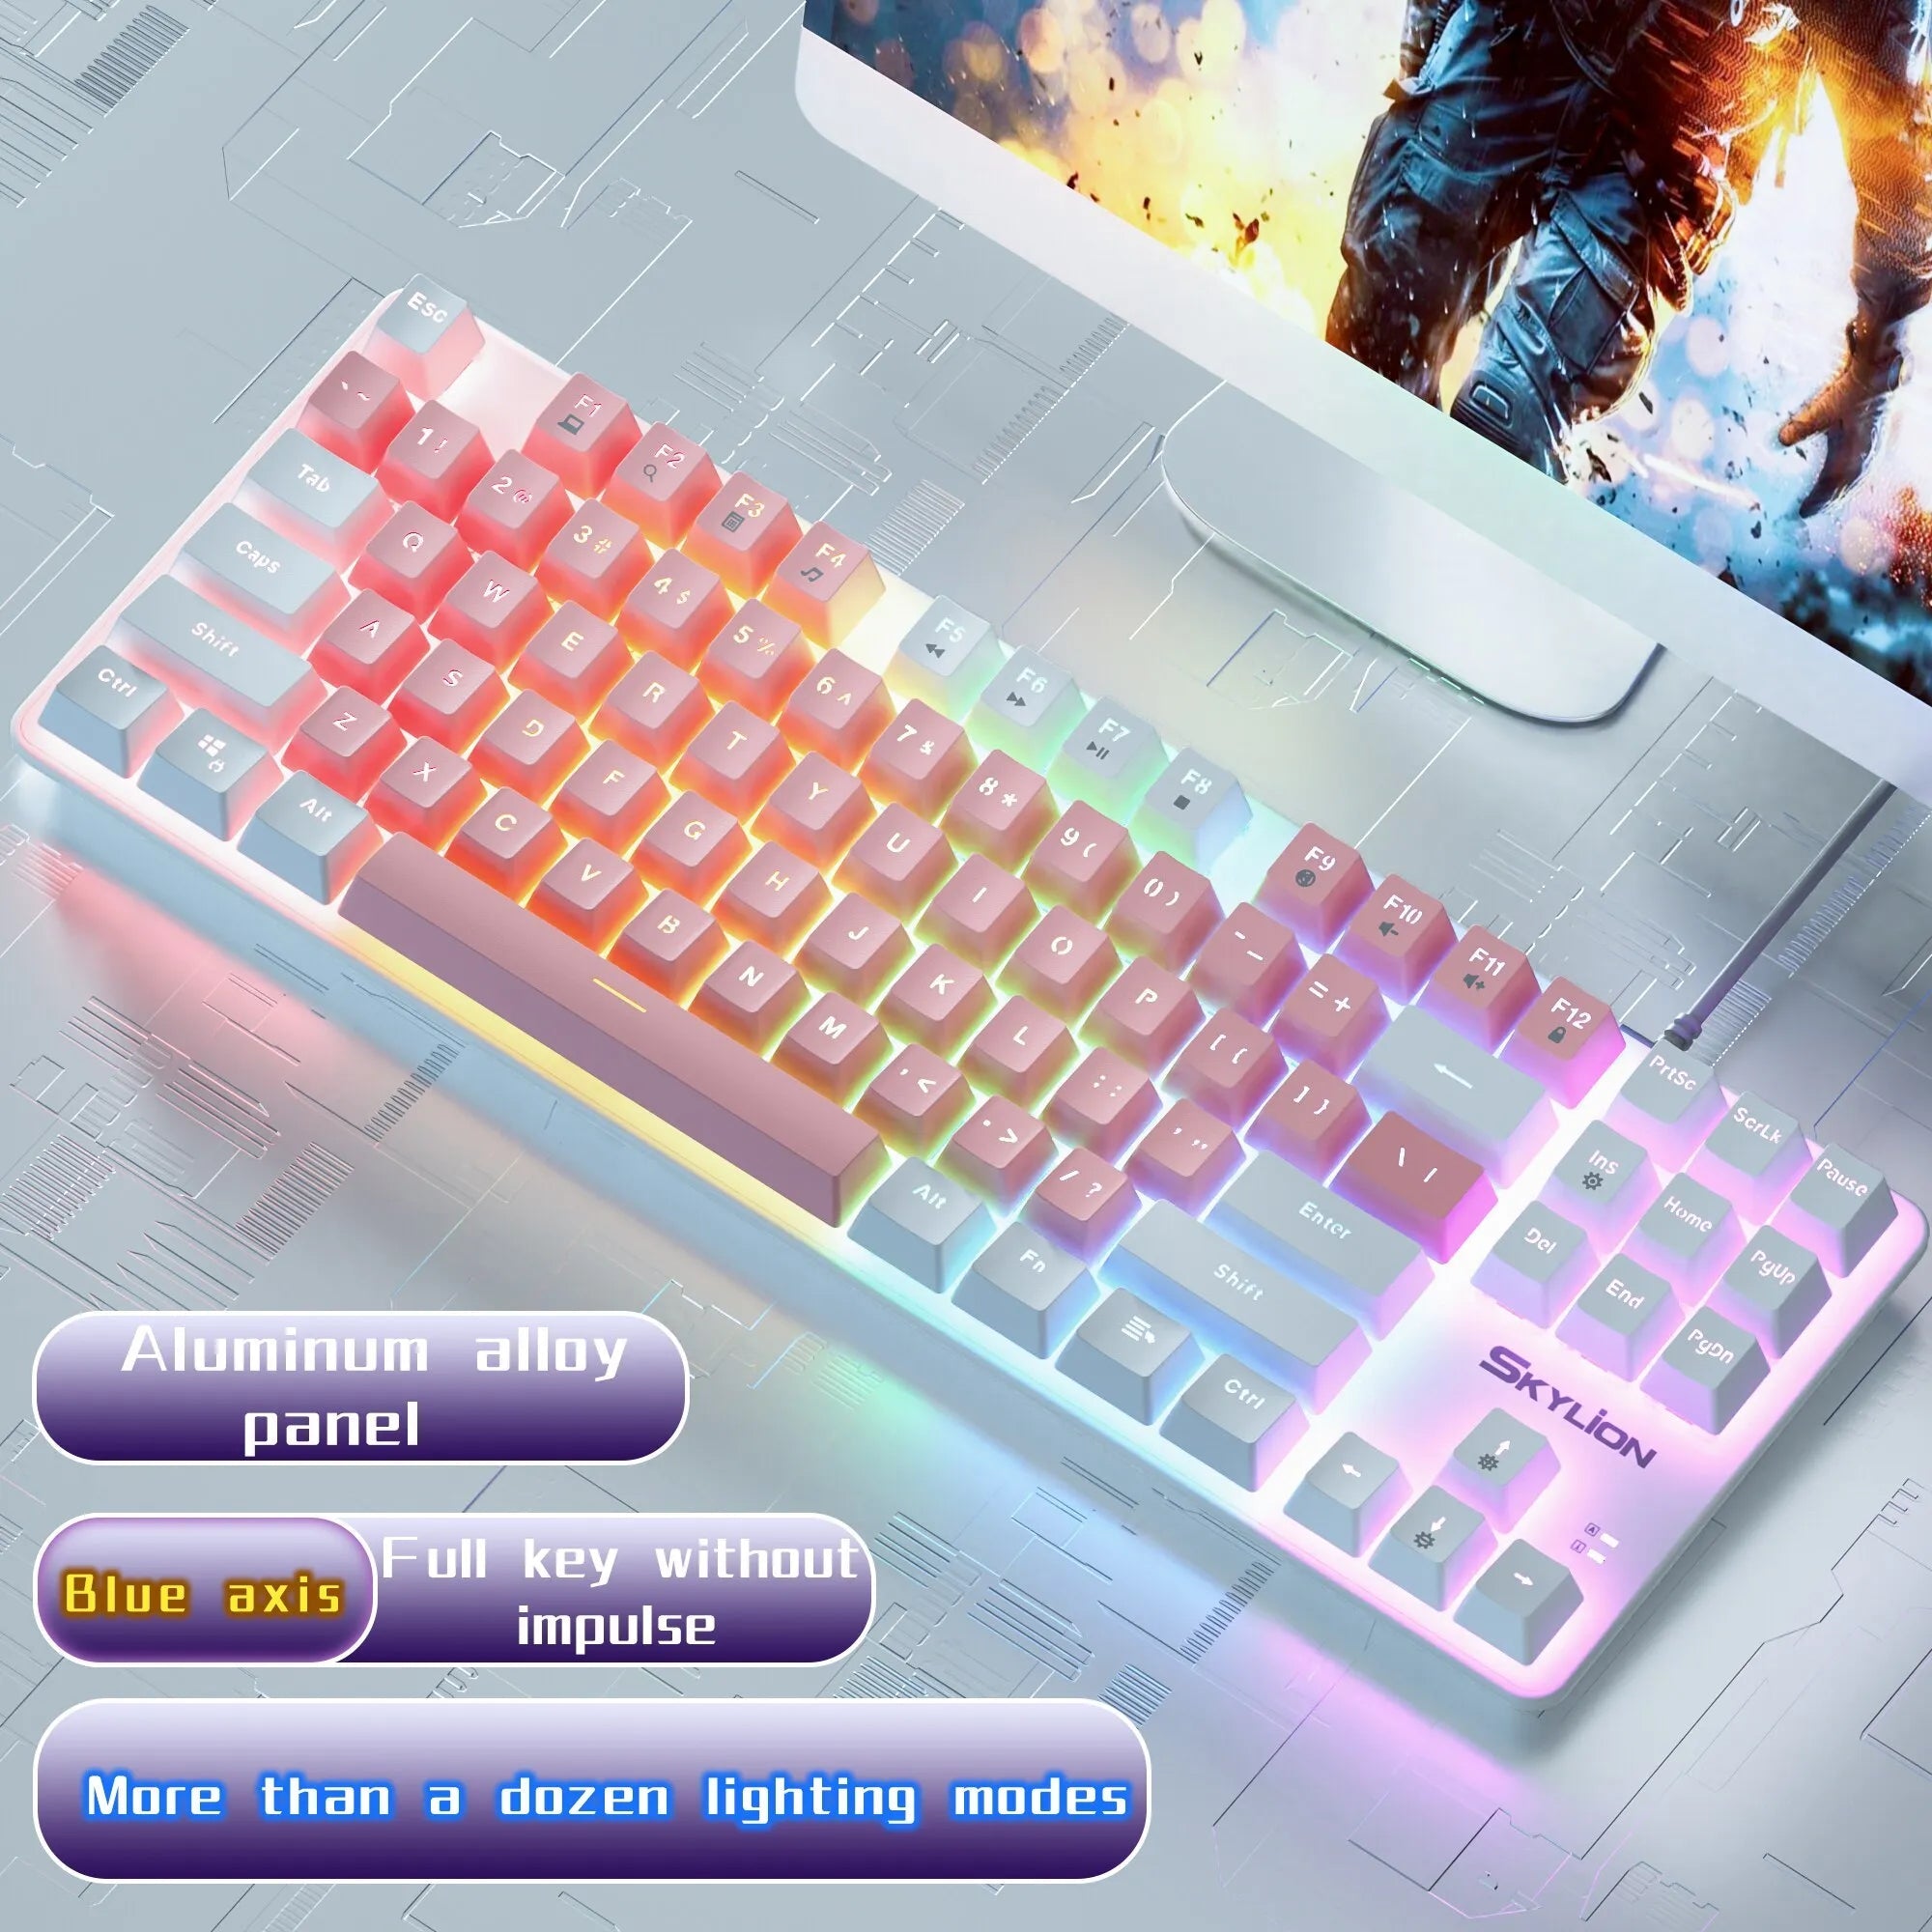 SKYLION Mechanical Gaming Keyboard | With Glowing Lights